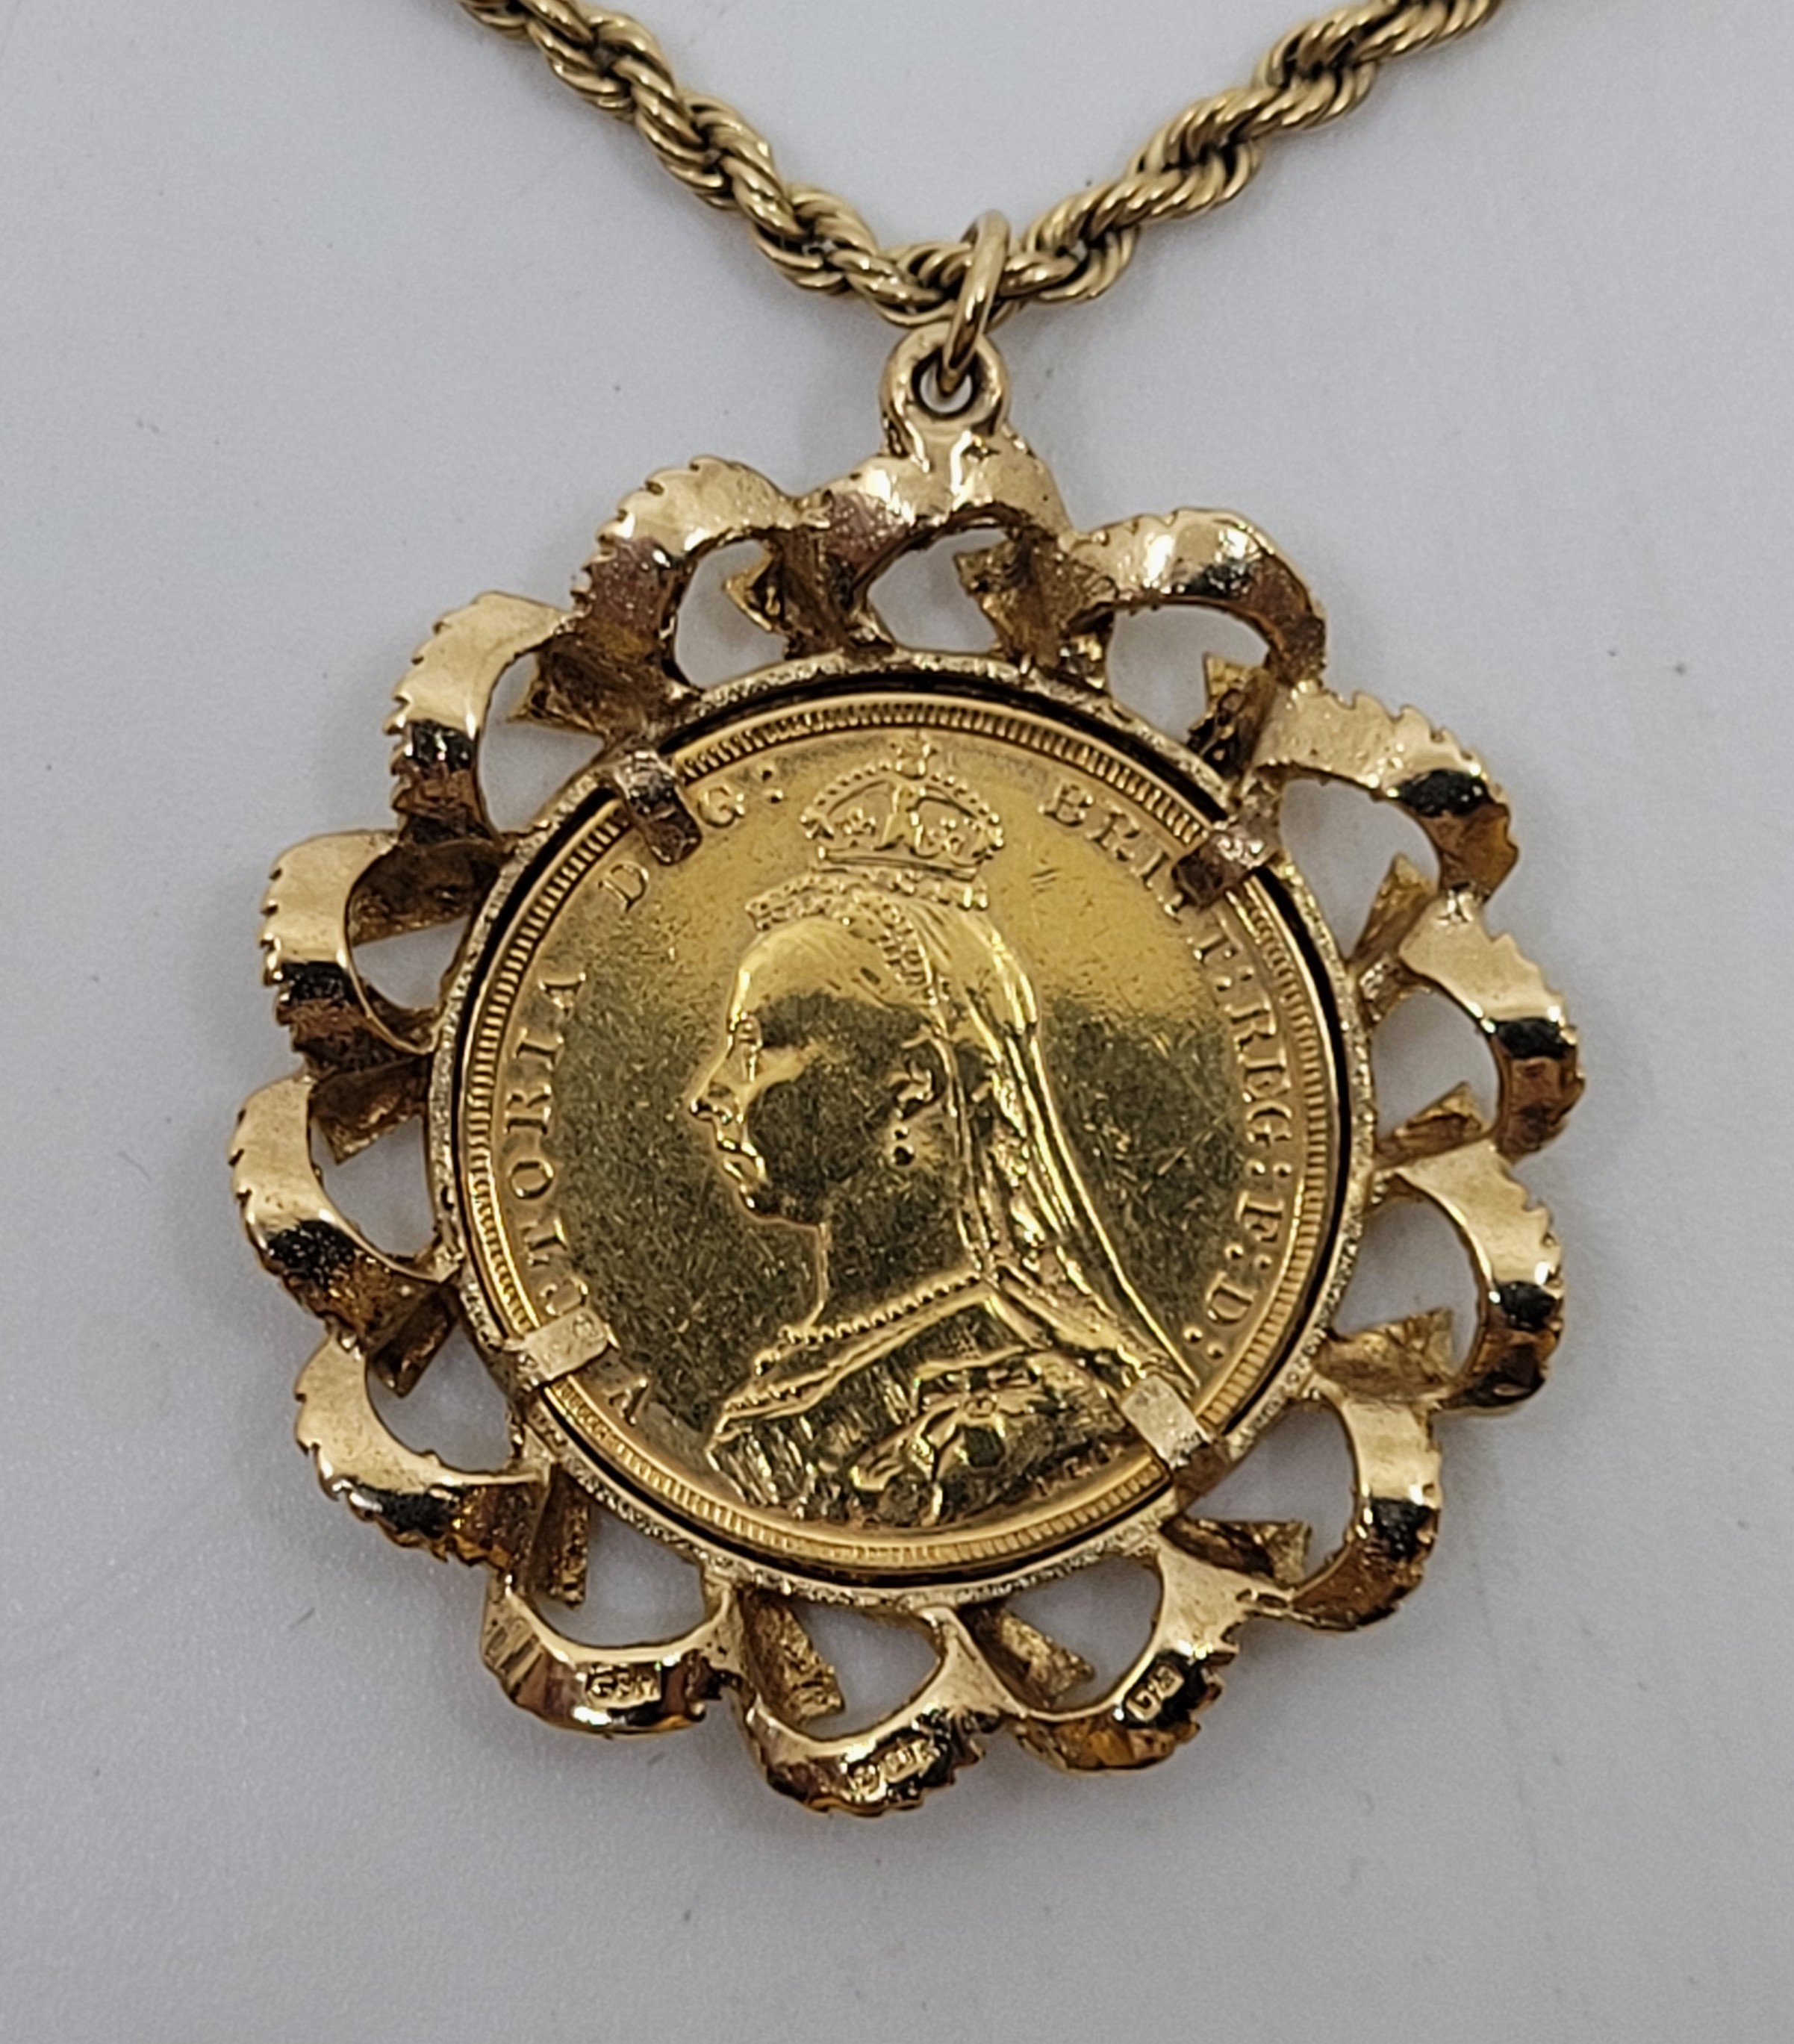 A Victoria 1890 "jubilee bust" gold sovereign coin, London mint, in 9ct. gold pendant mount, - Image 3 of 3